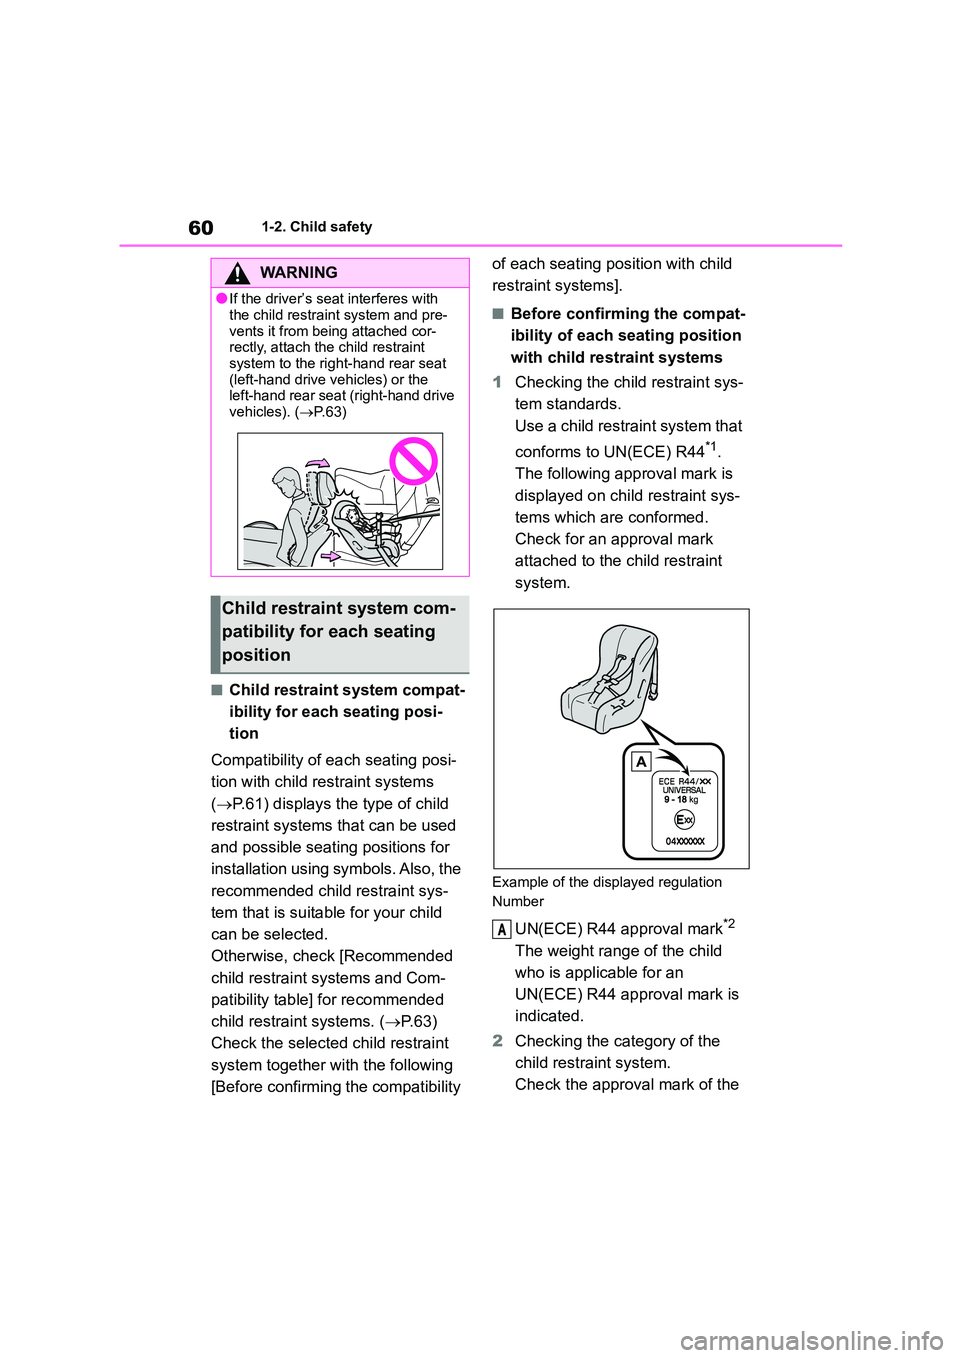 TOYOTA GR86 2022  Owners Manual (in English) 601-2. Child safety
■Child restraint system compat- 
ibility for each seating posi-
tion 
Compatibility of eac h seating posi- 
tion with child restraint systems 
( P.61) displays the type of chi